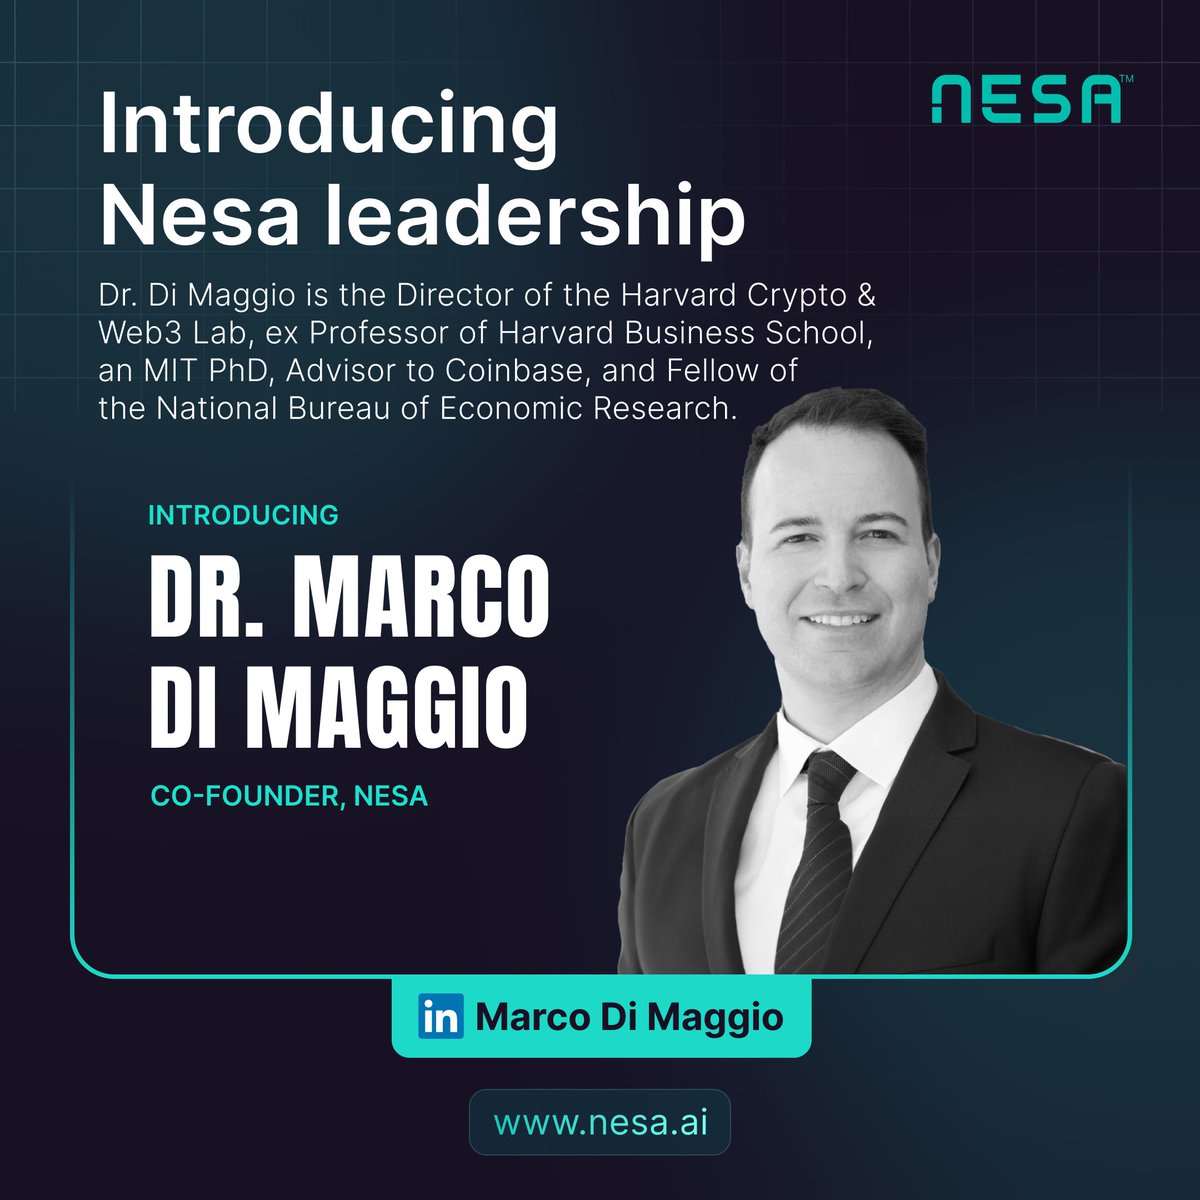 Introducing Co-founder of Nesa and Nesa's Chief of Strategy, Dr. Marco Di Maggio. Dr. Di Maggio is the founding Director of the Harvard Fintech, Crypto and Web3 Lab. He is Professor of Finance at Imperial College and was Professor of Business at Harvard Business School. In 2016